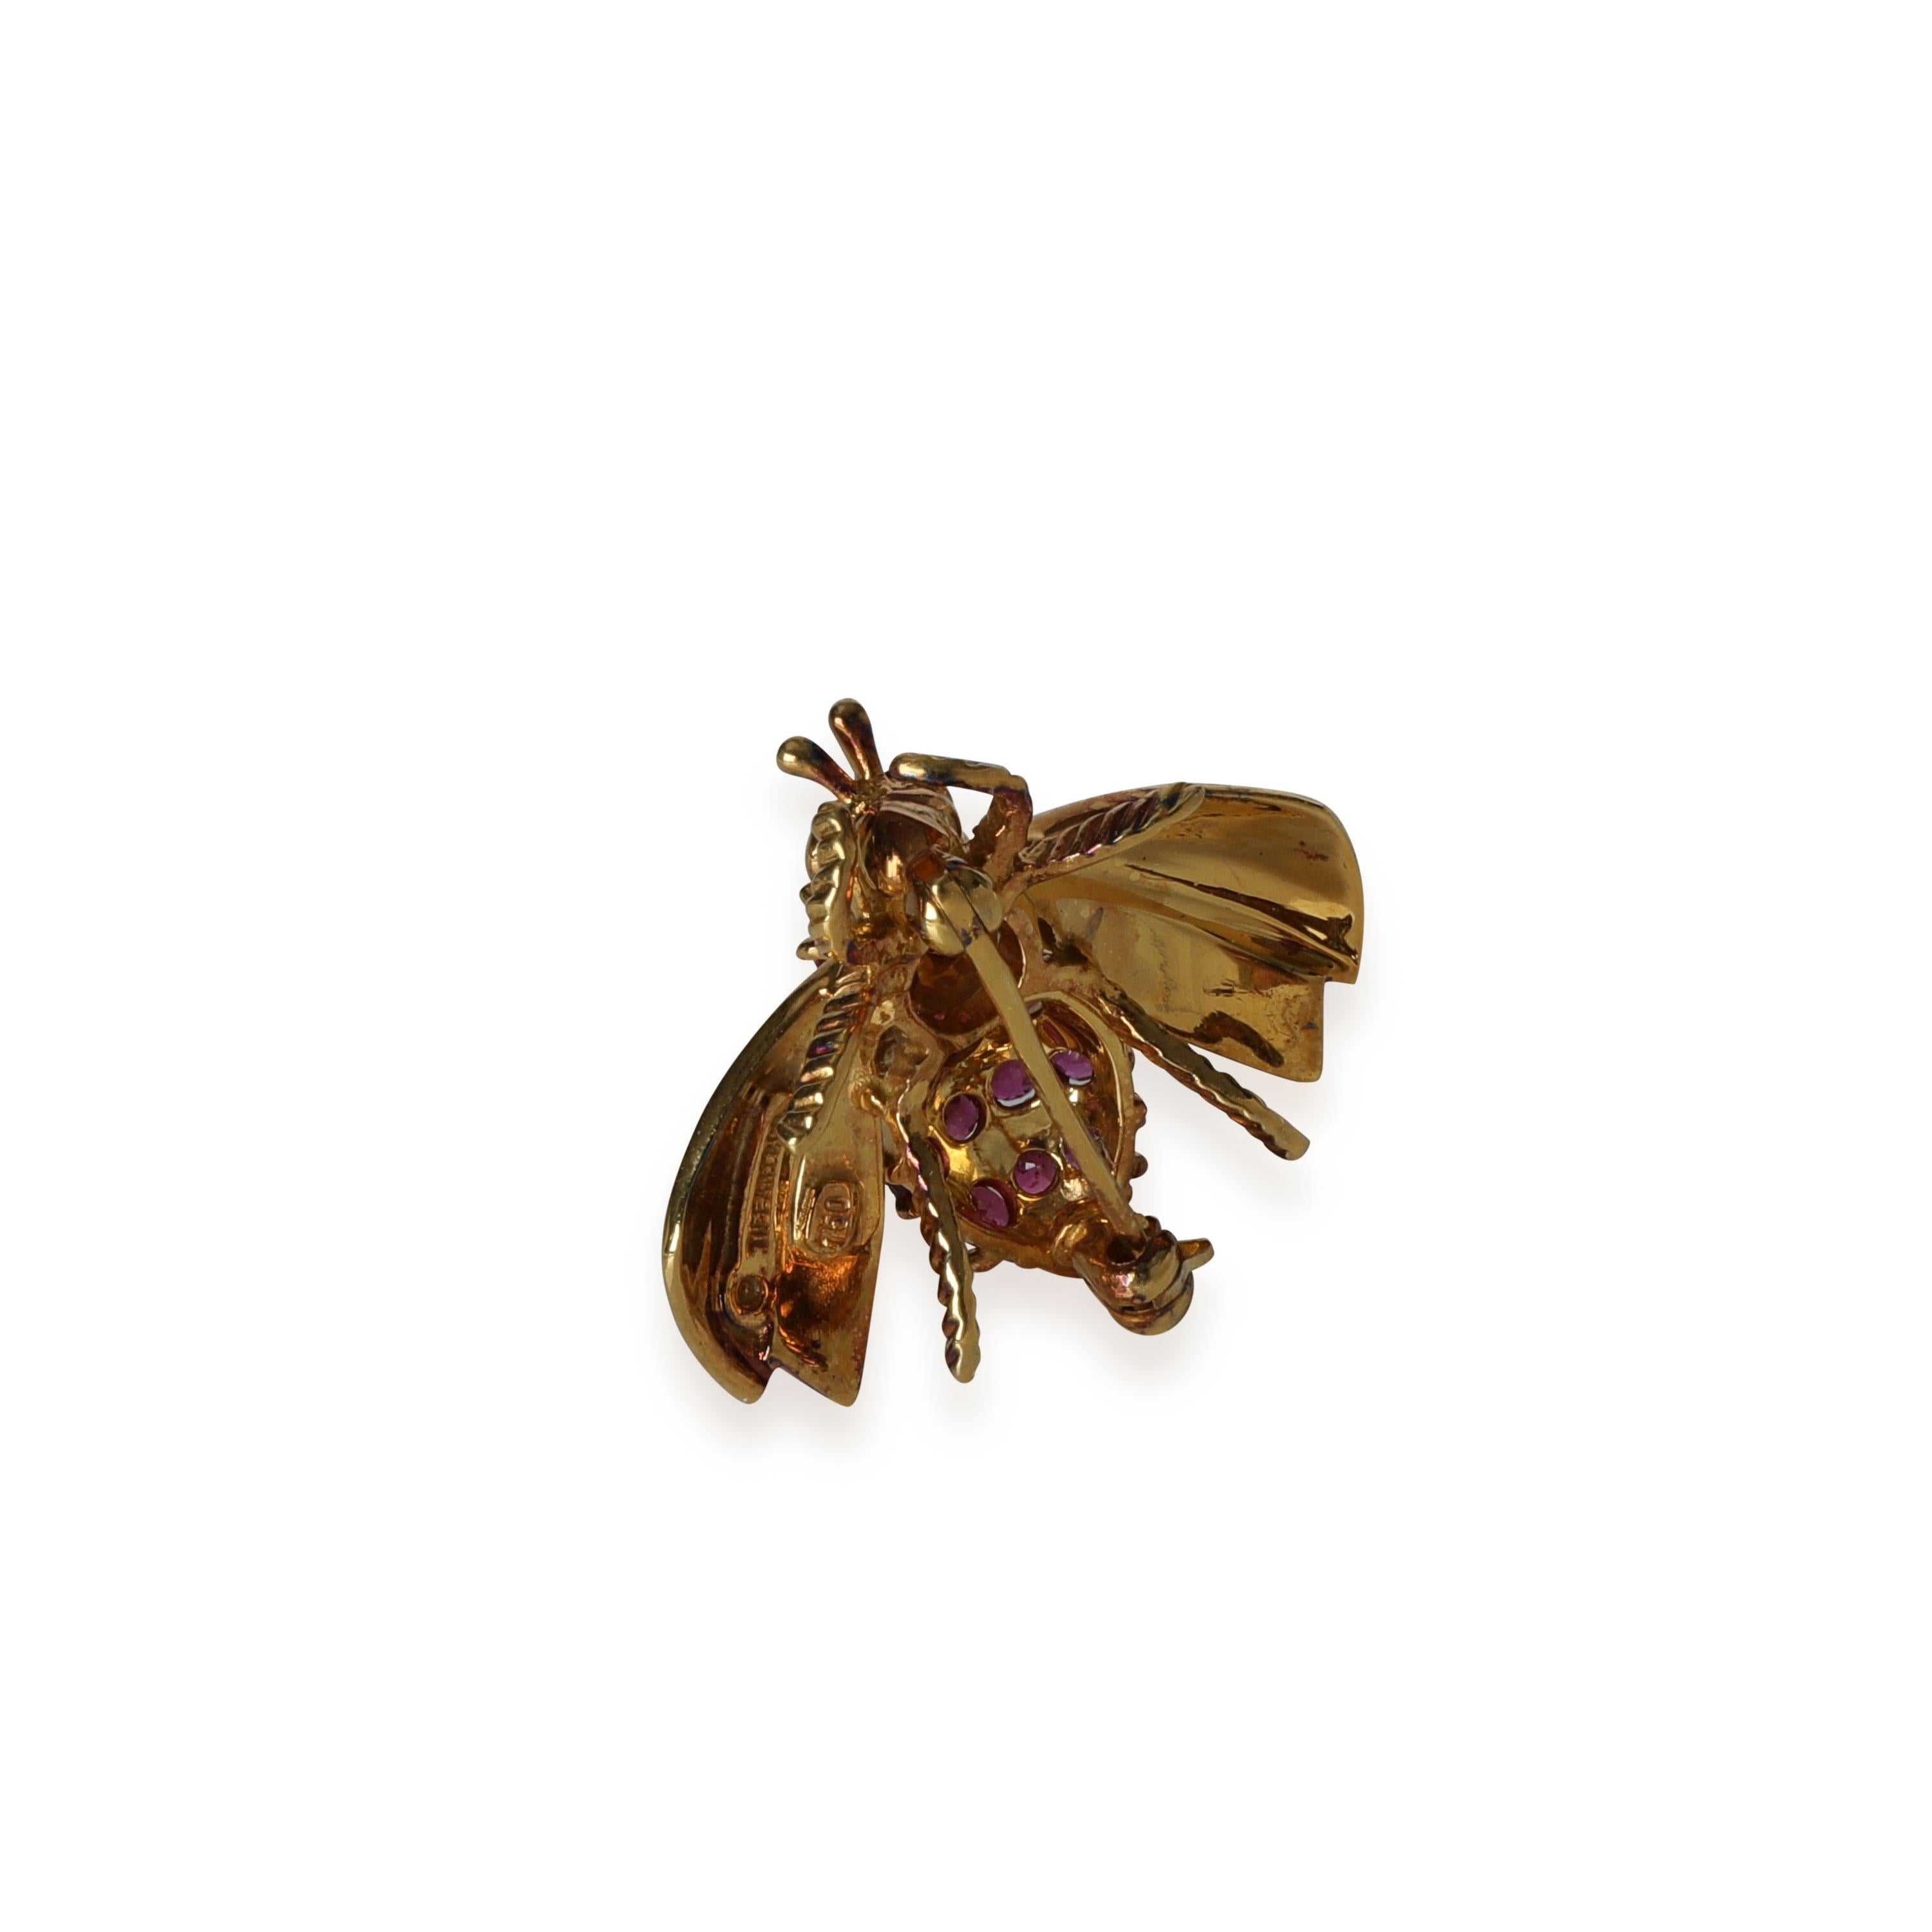 Tiffany & Co. Diamond Bee Pin in 18k Yellow Gold 0.07 CTW

PRIMARY DETAILS
SKU: 116223
Listing Title: Tiffany & Co. Diamond Bee Pin in 18k Yellow Gold 0.07 CTW
Condition Description: Retails for 2500 USD. Length is 0.75 inches.
Brand: Tiffany &